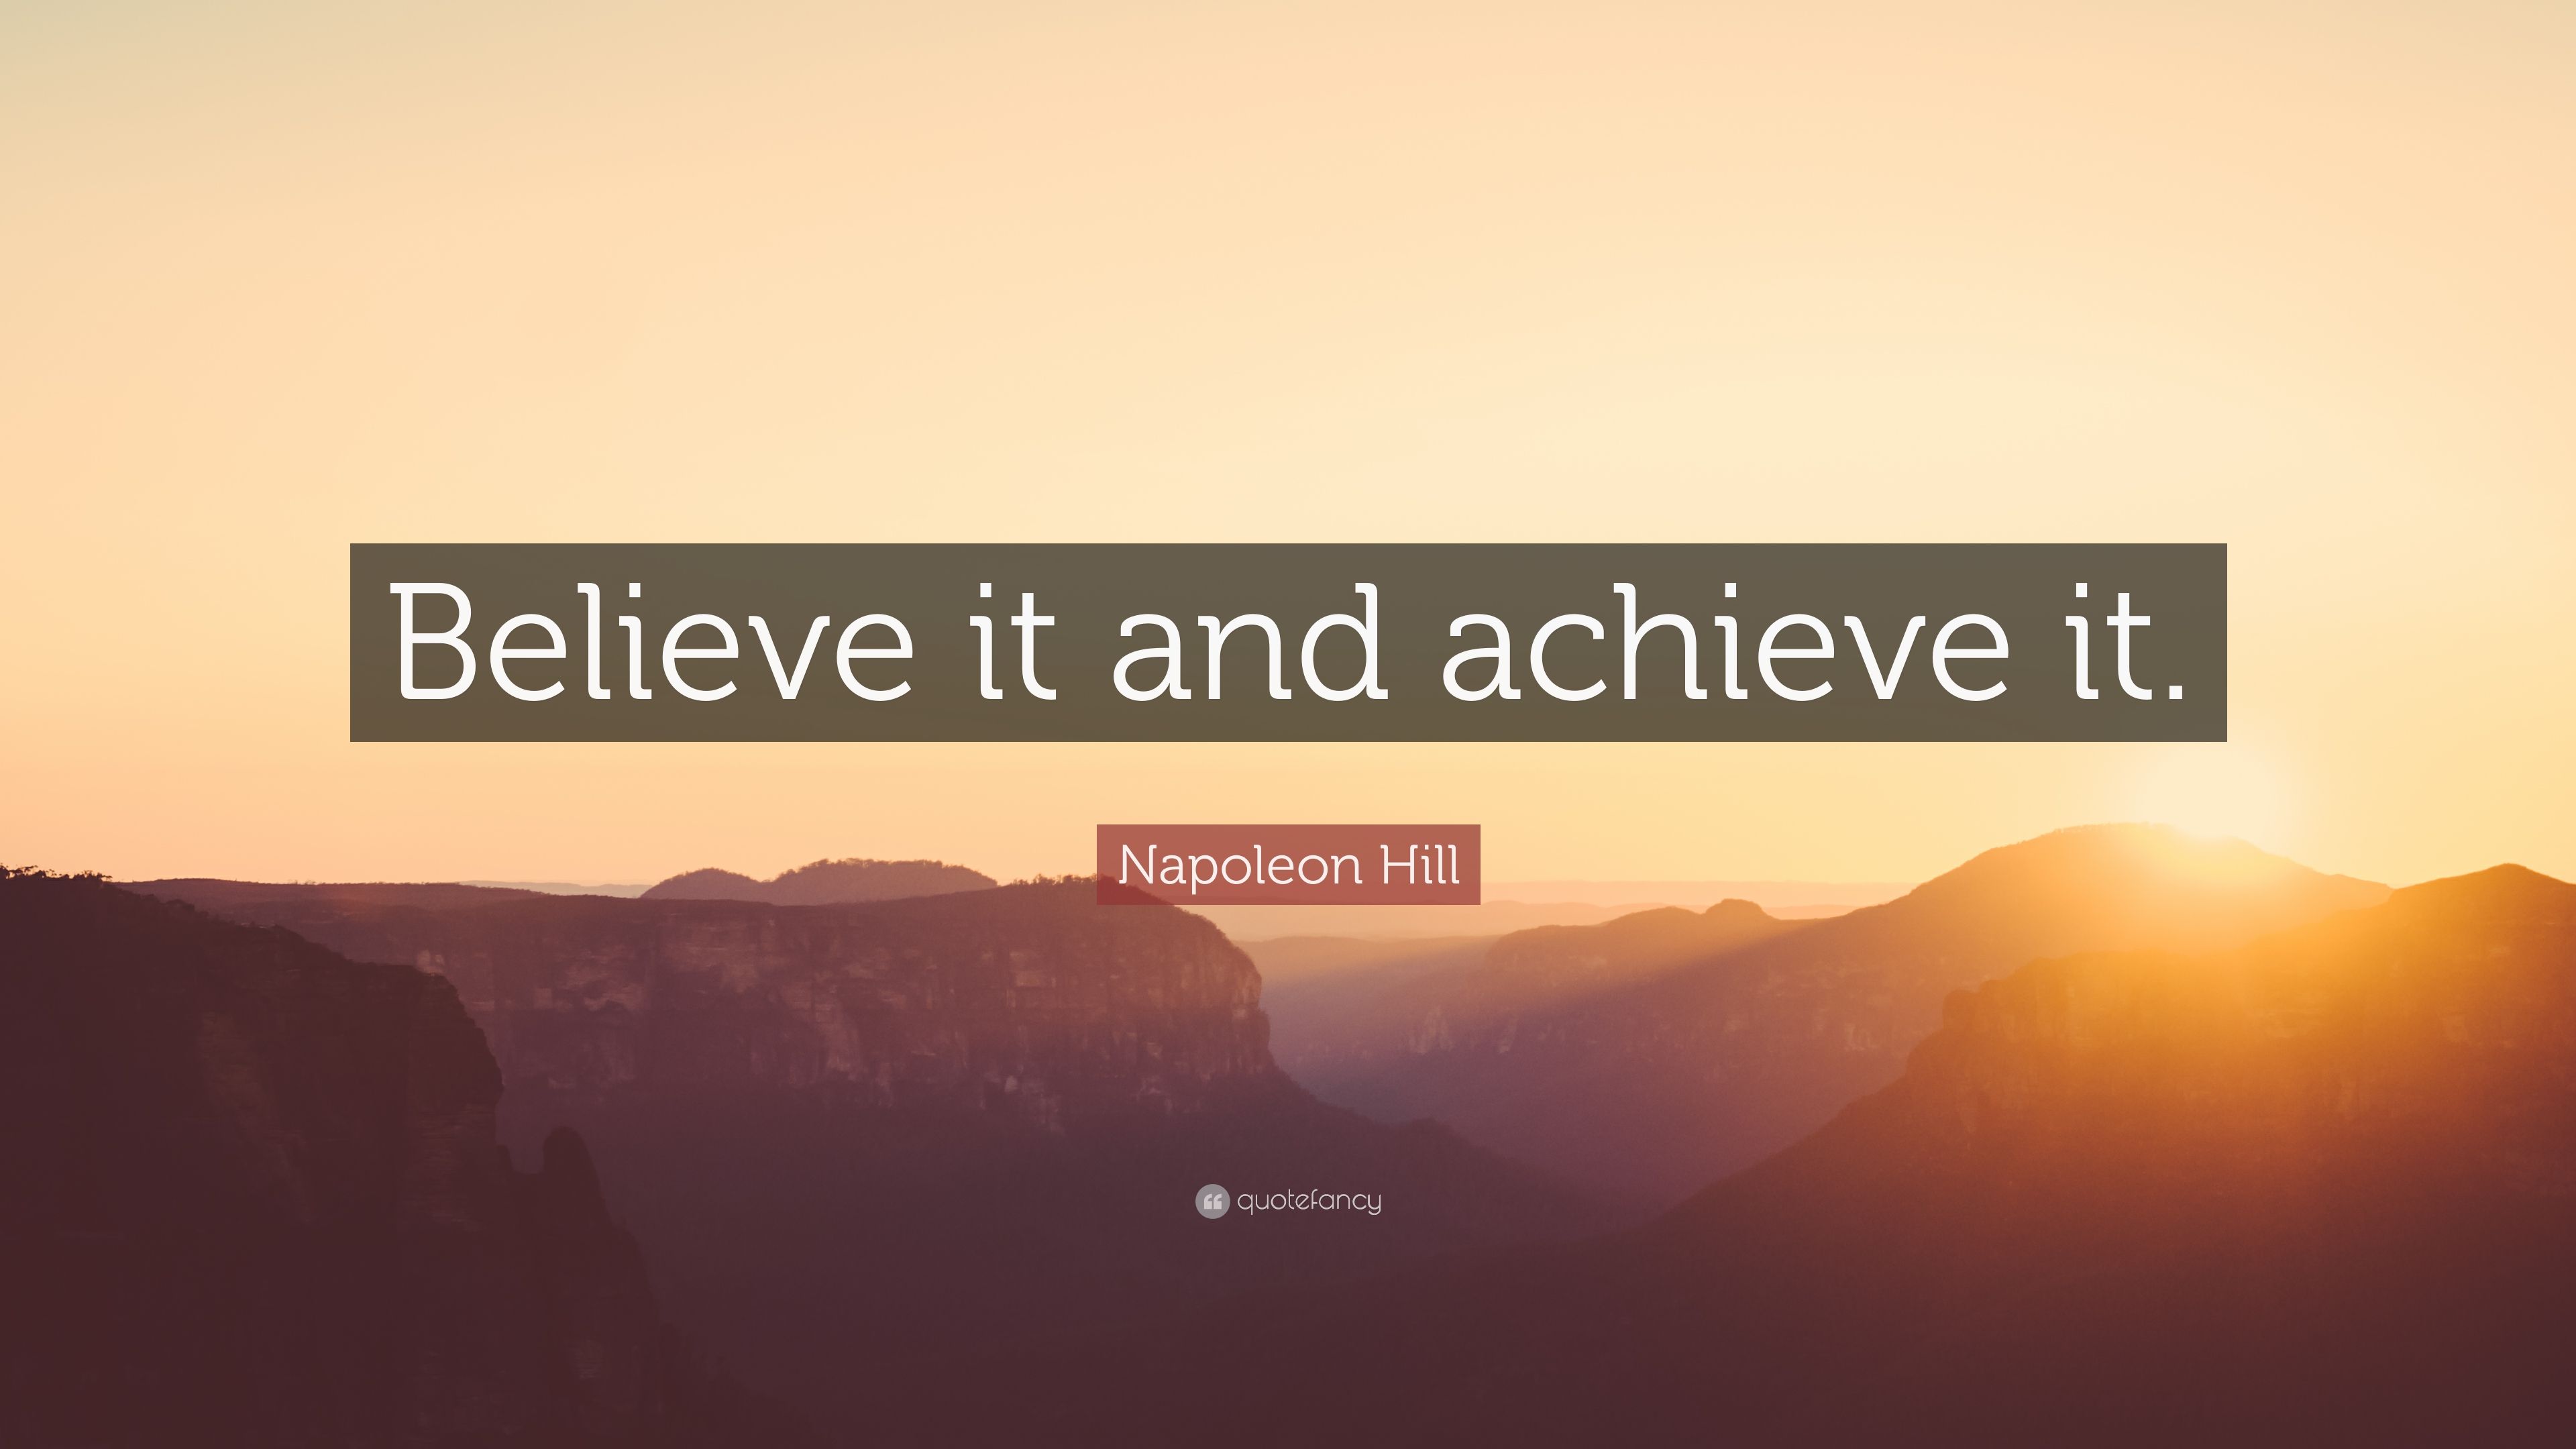 Napoleon Hill Quote: “Believe it and achieve it.” (7 wallpaper)